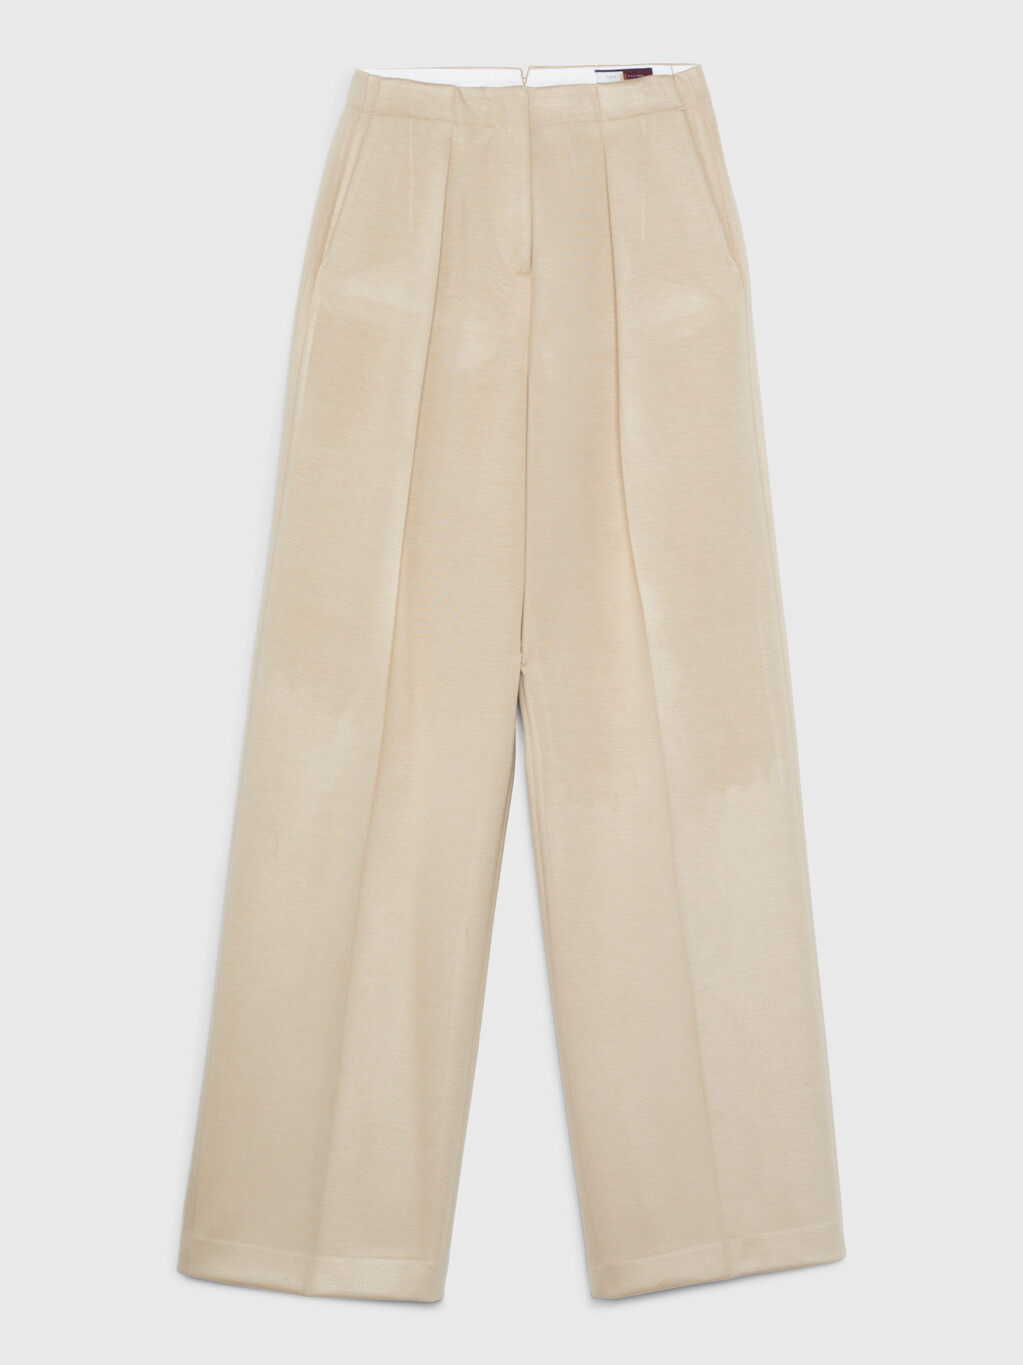 Crest Relaxed Wide Leg Jersey Trousers, Sandy Beige, hi-res